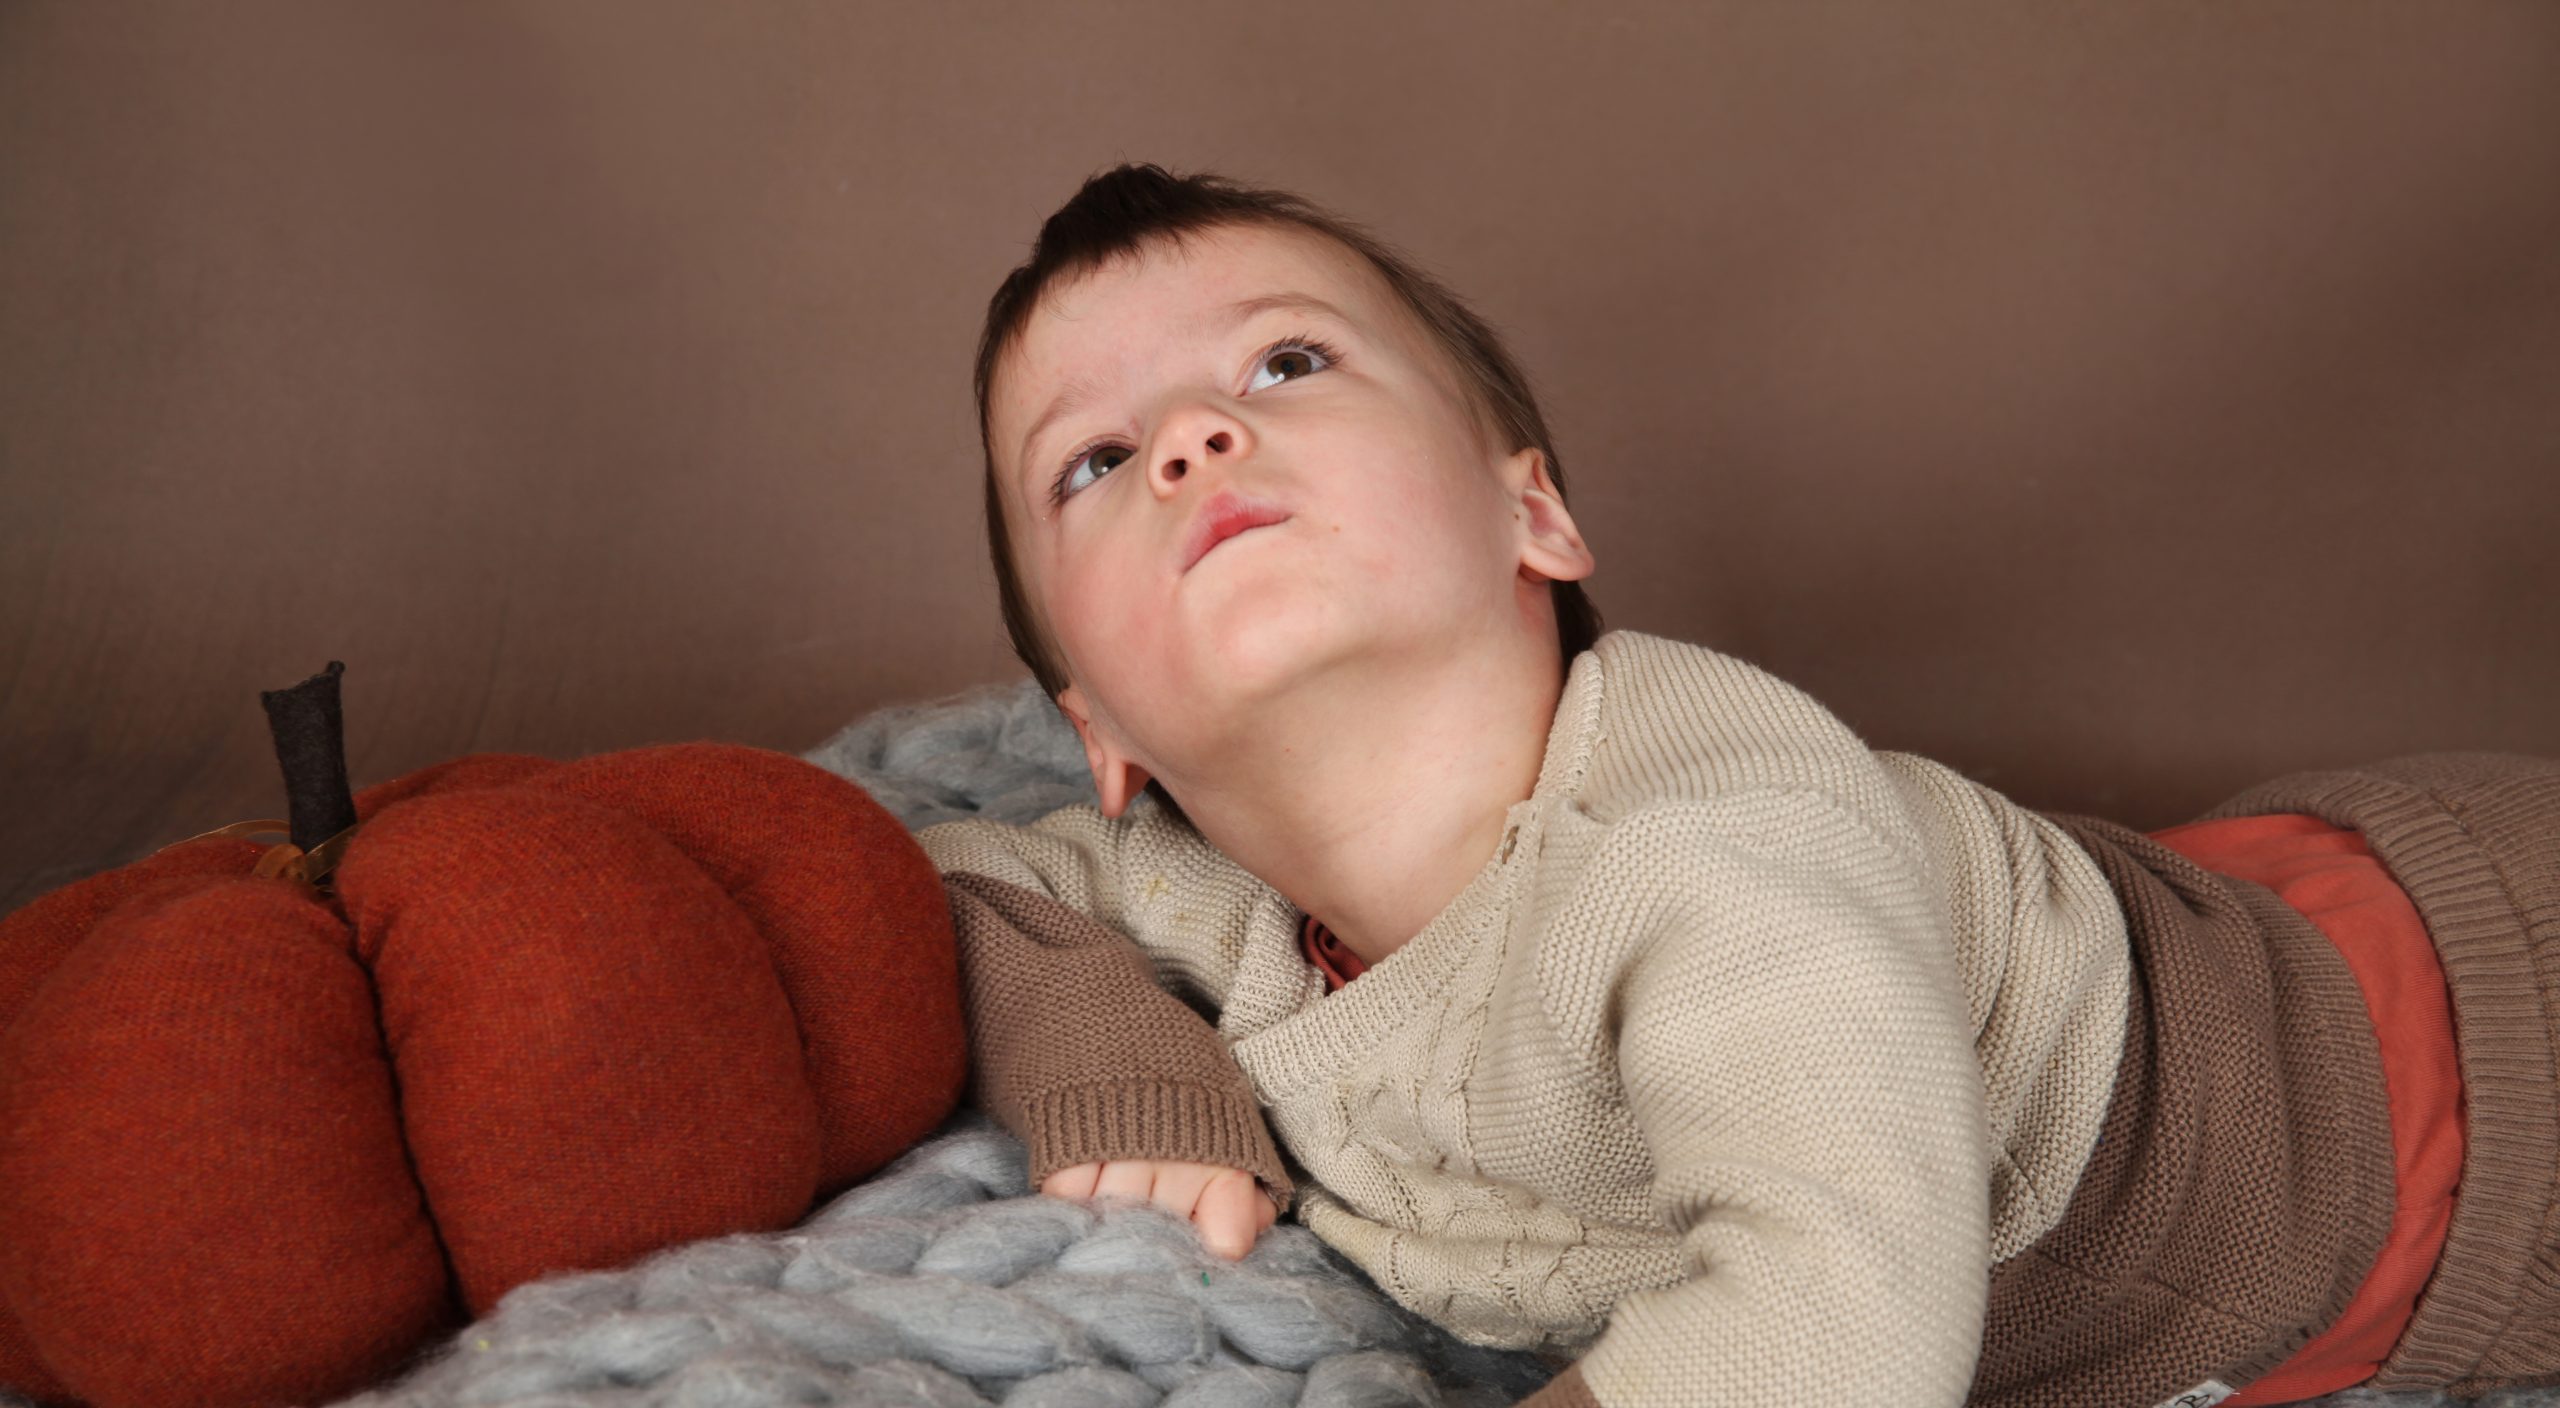 A young boy lying on is front. He props his head up and looks up to the sky looking to be in deep thought. A pumpkin made from material is sat next to him and he lies on a grey, knitted blanket.